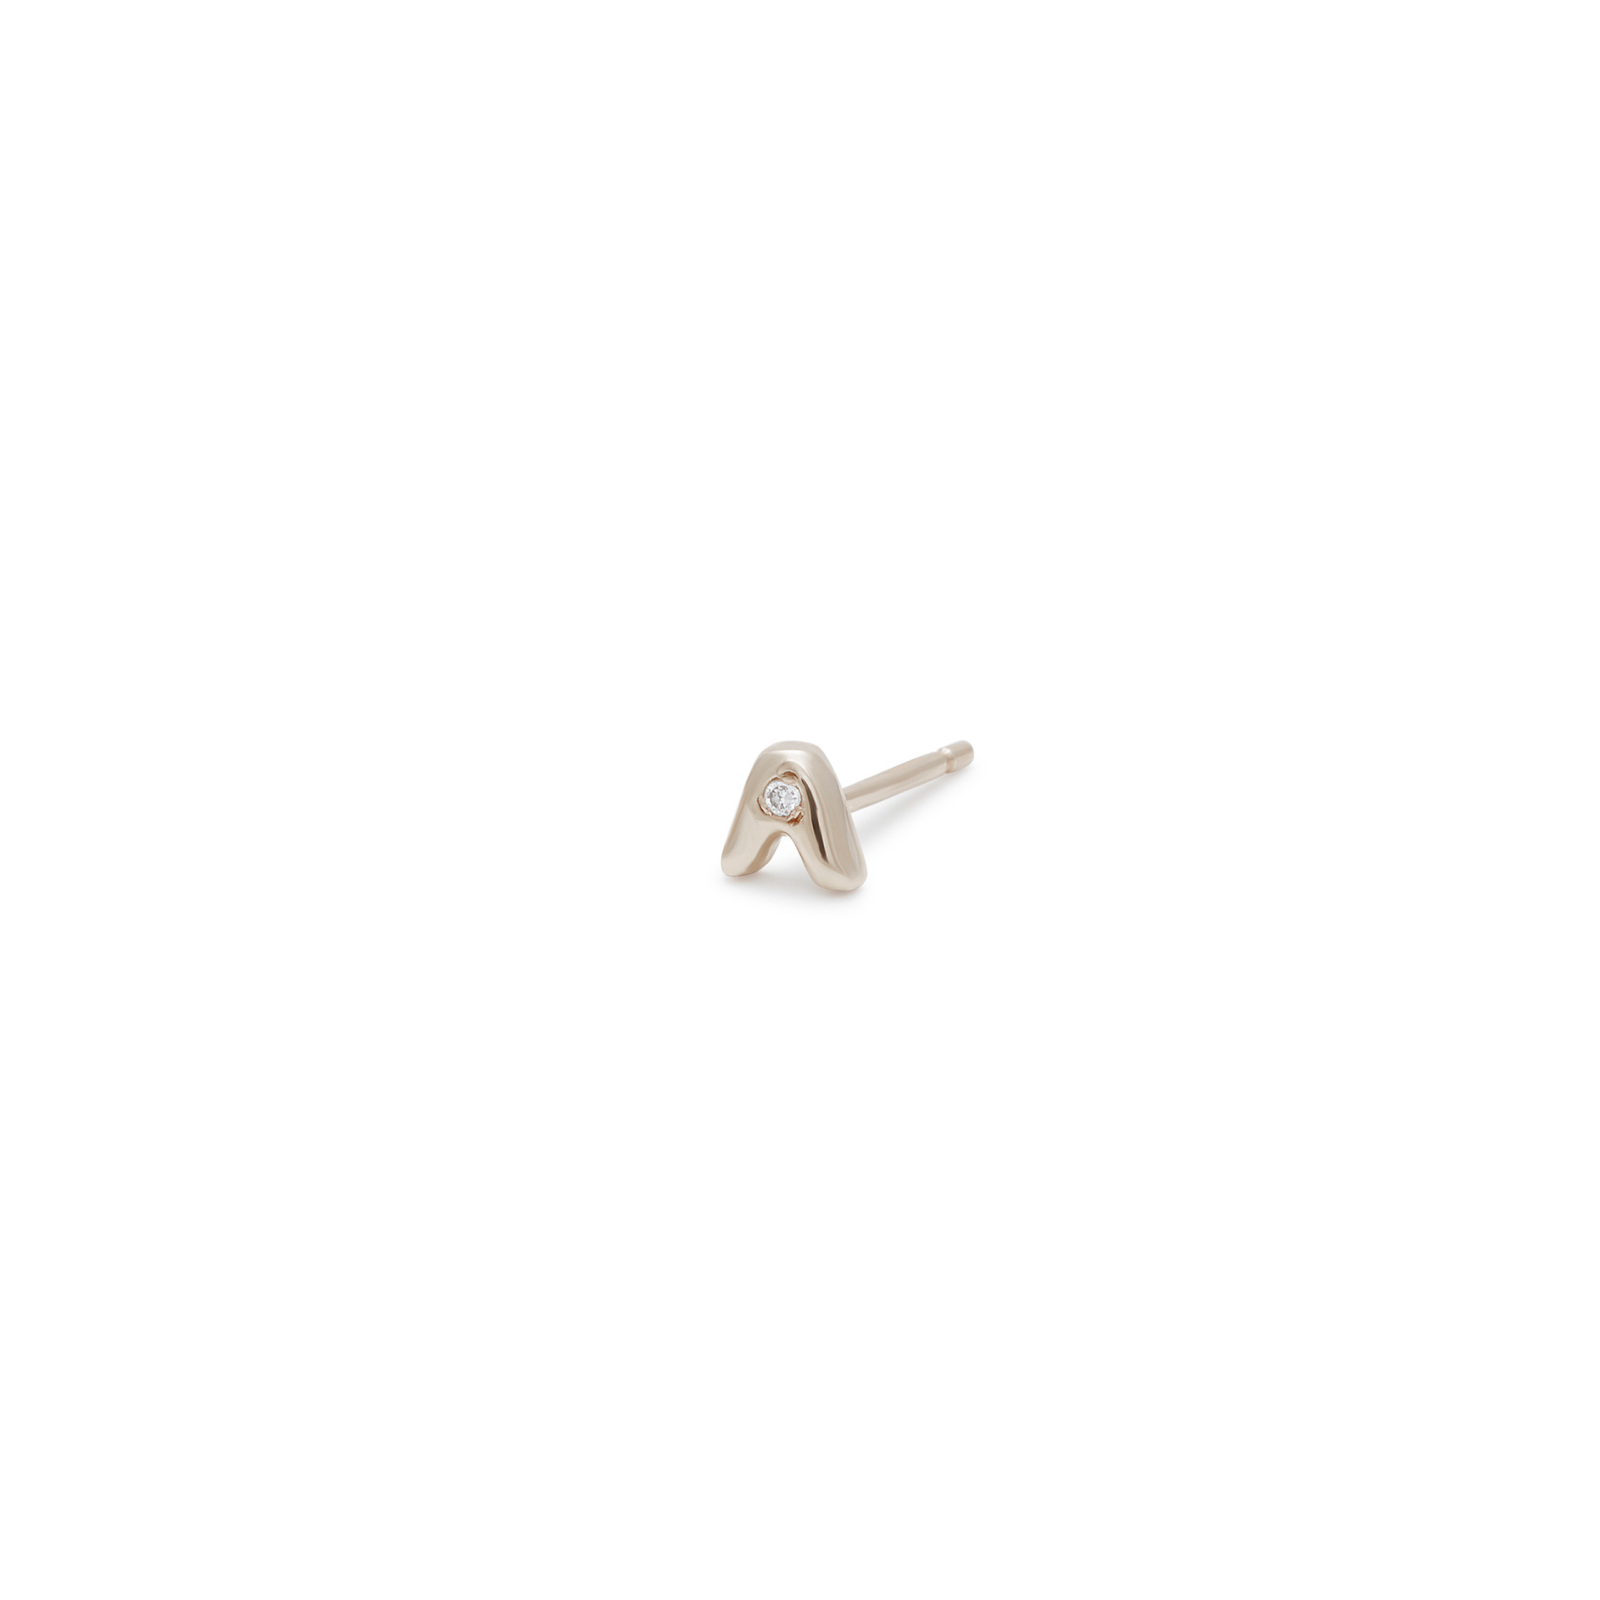 Letter Stud Earring in 14k White Gold with White Diamonds